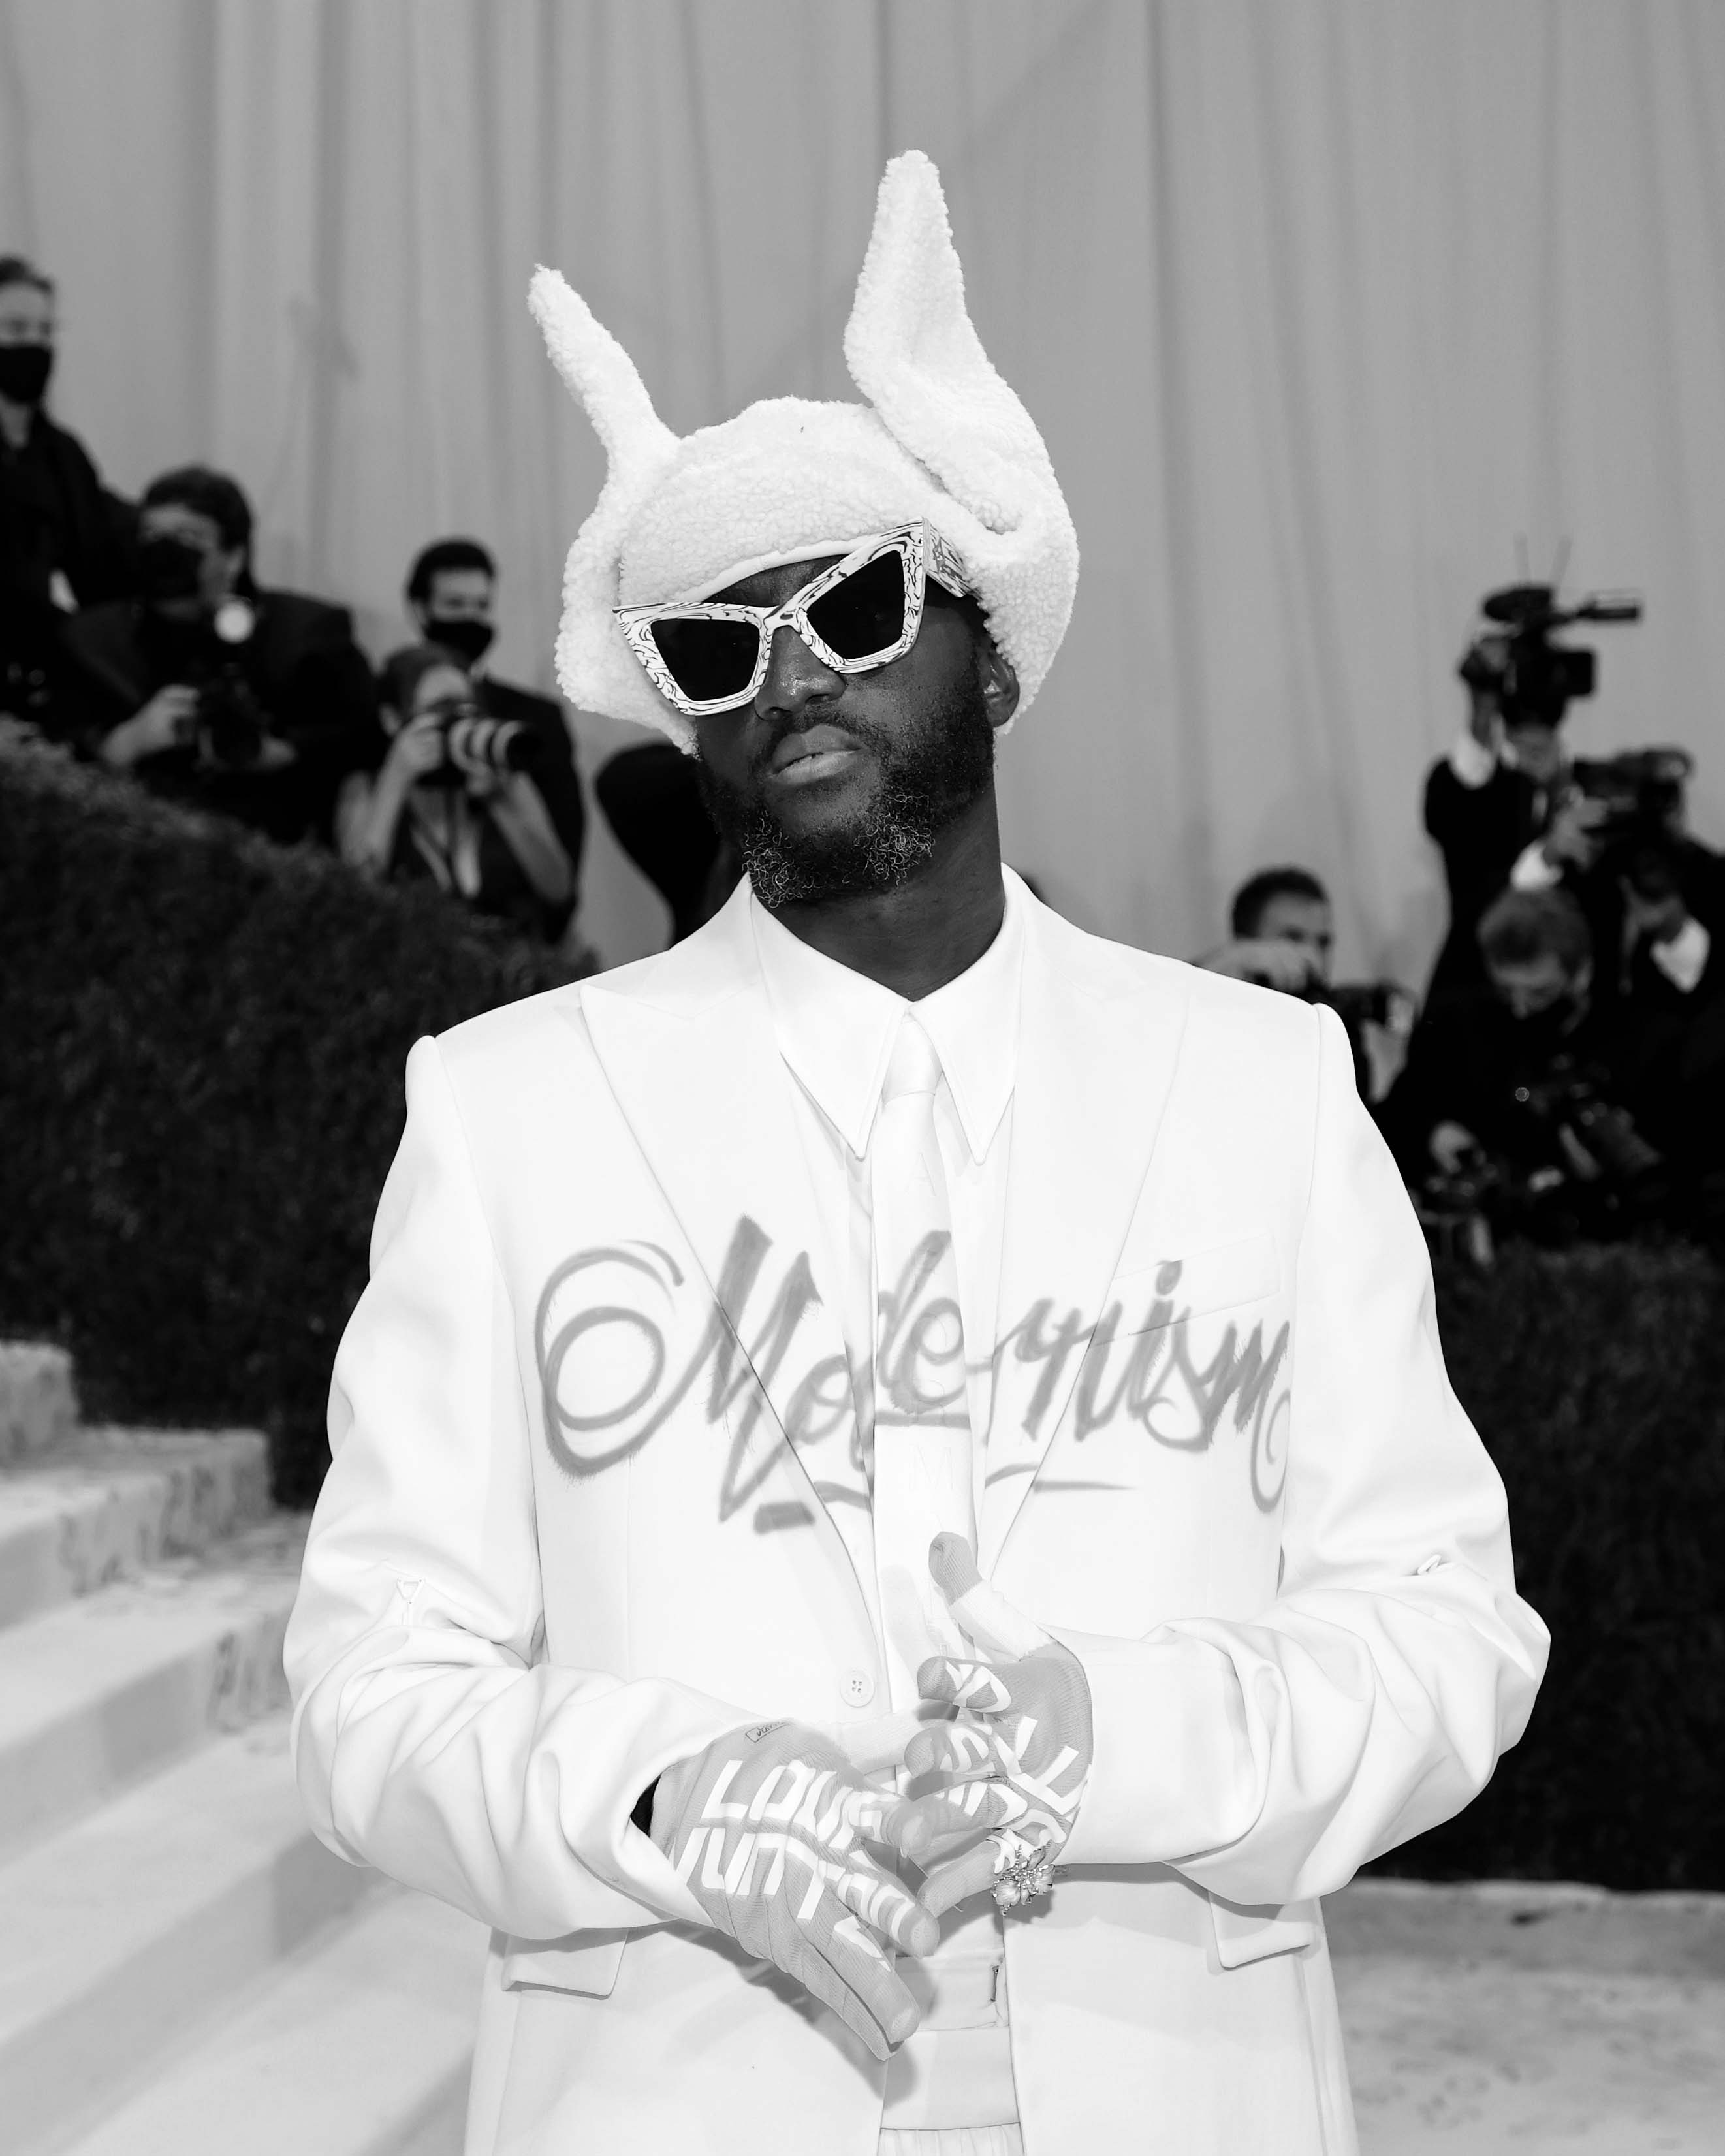 See Virgil Abloh preview a new Louis Vuitton suit at the Met Gala – HERO